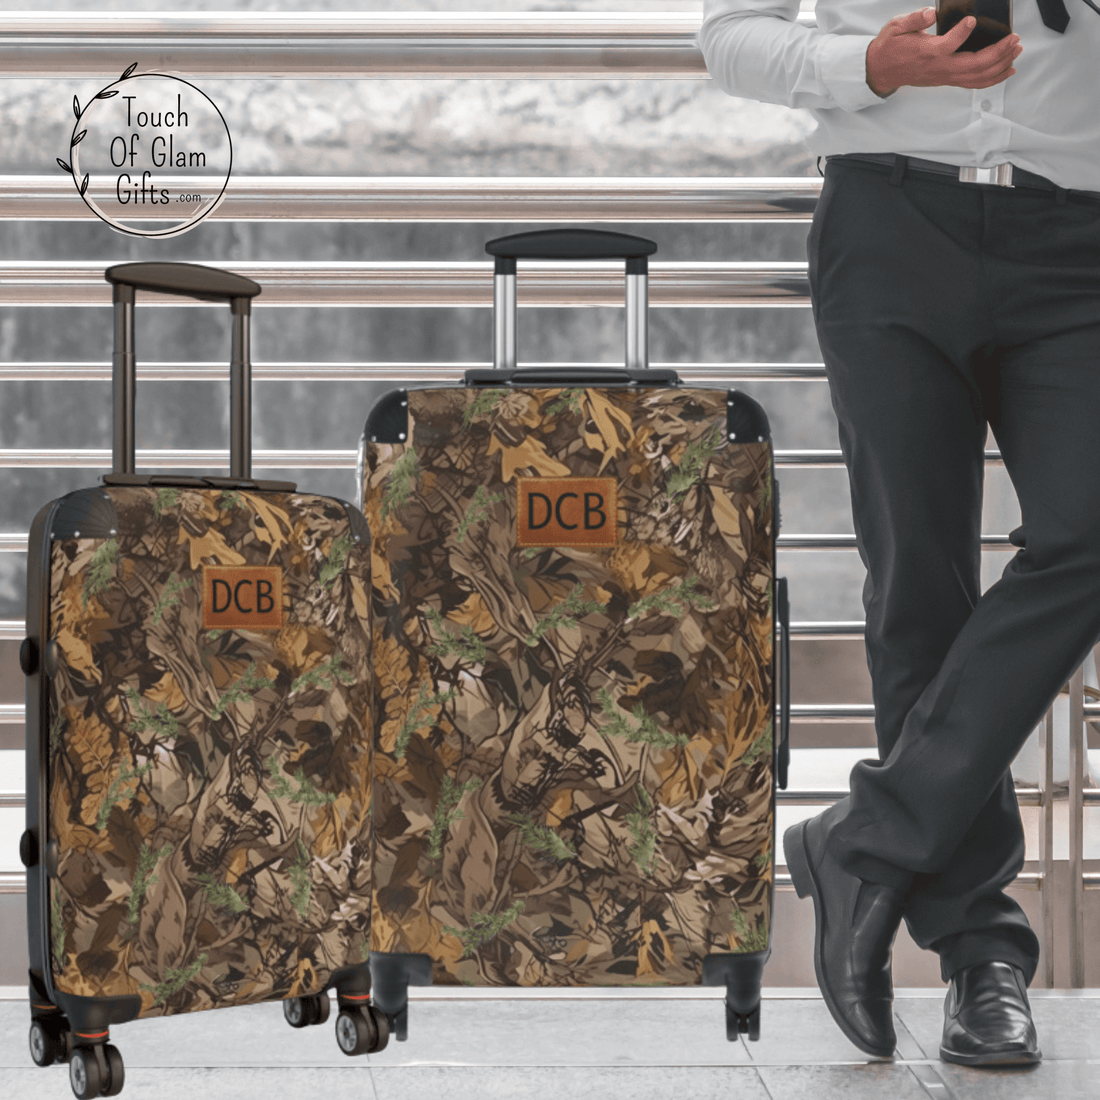 monogram camouflage luggage and carry on suitcase for men makes a great gift for hunters